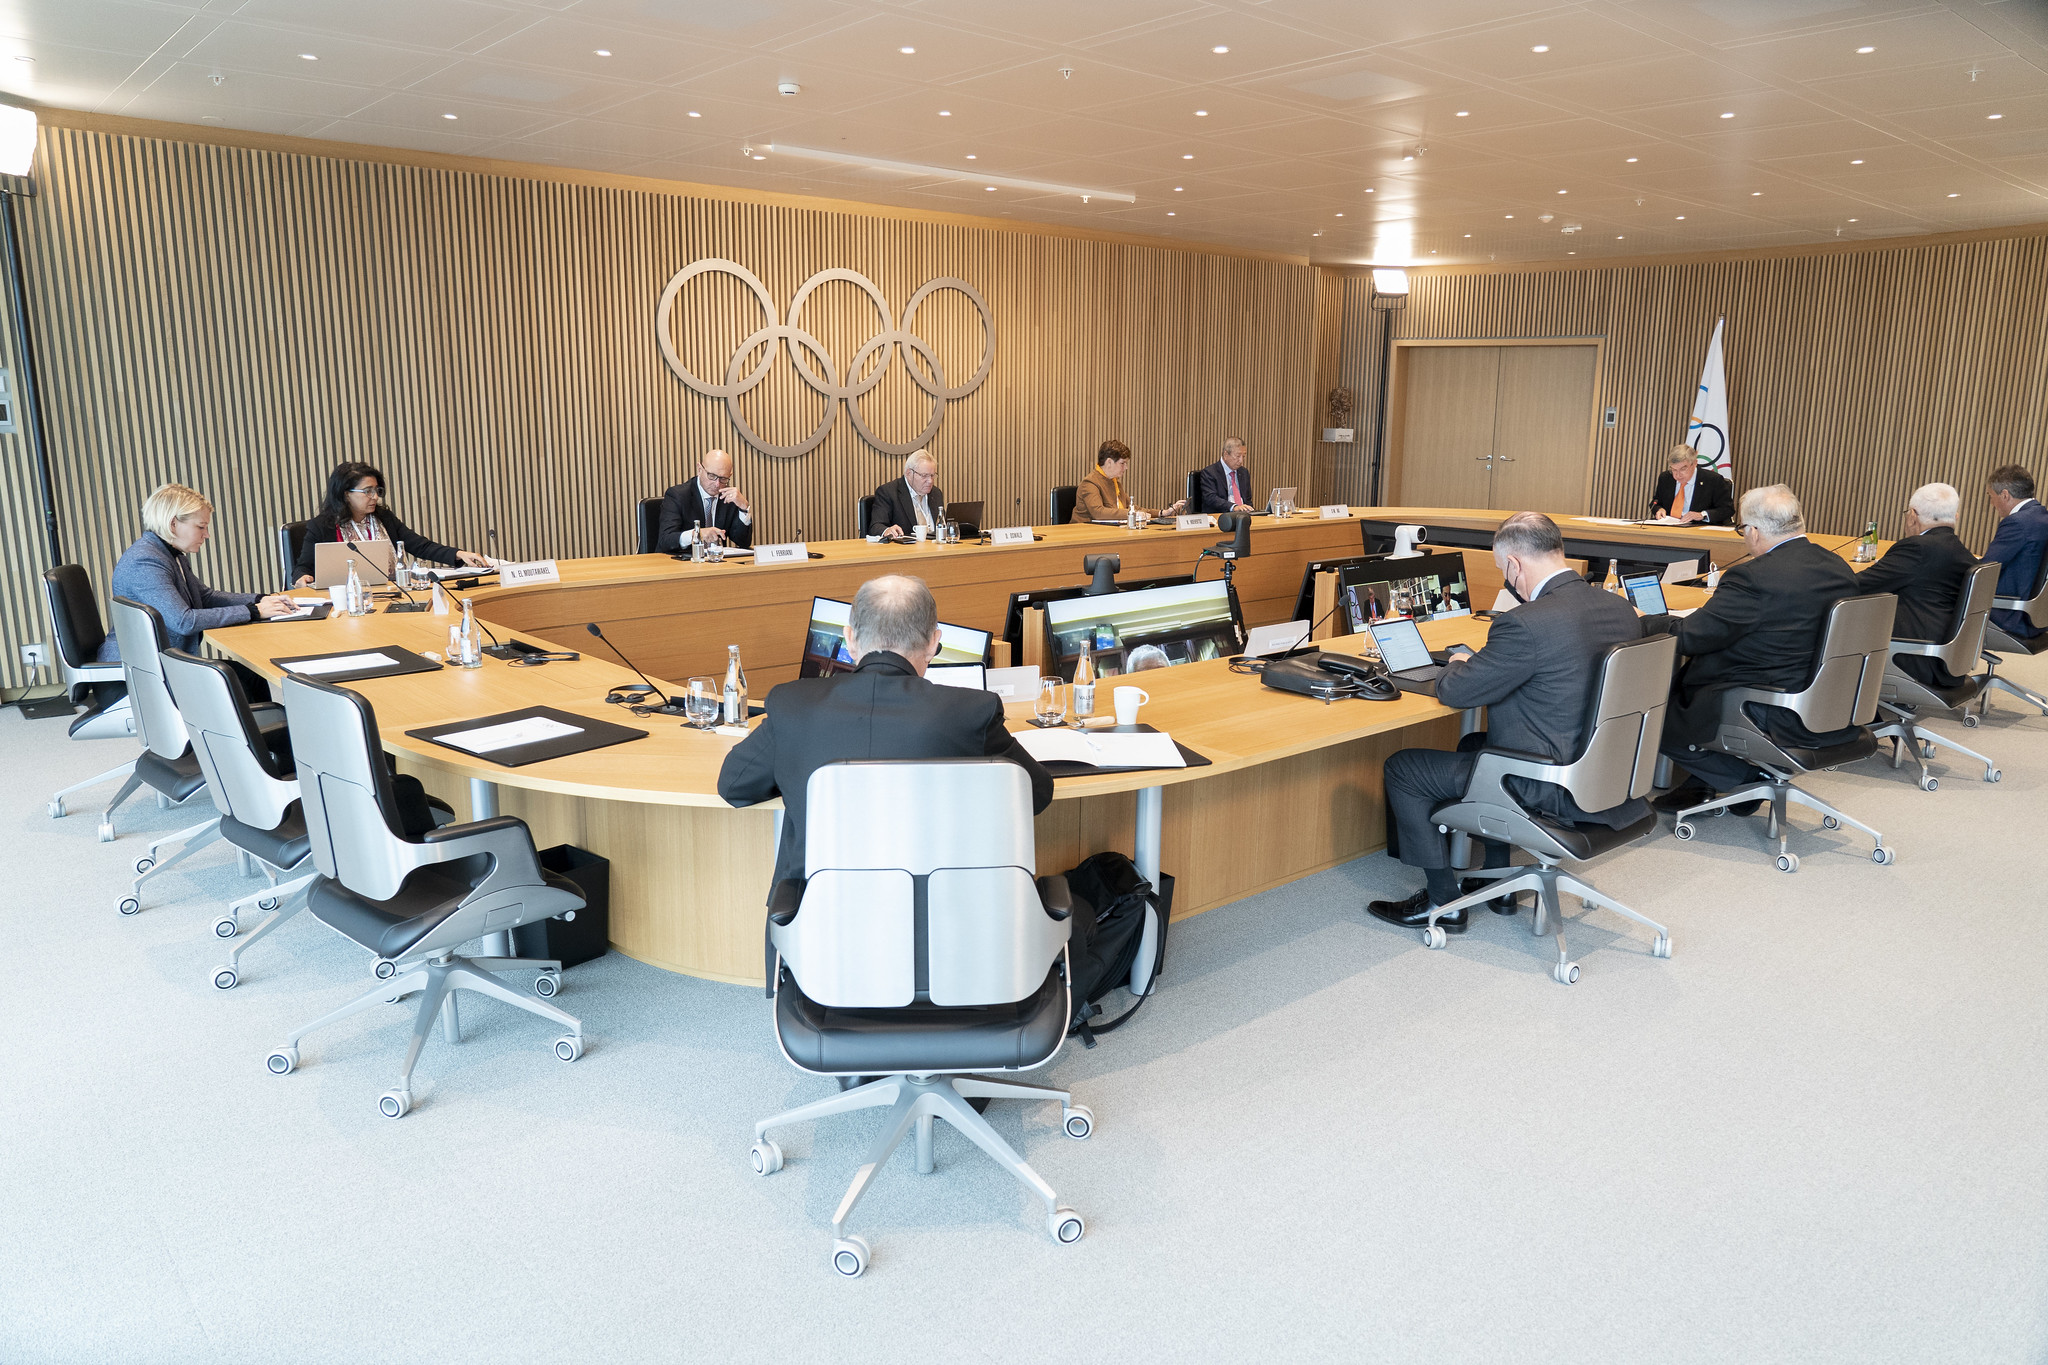 Statement on the Release of the International Olympic Committee’s New Framework on Fairness, Inclusion and Non-Discrimination